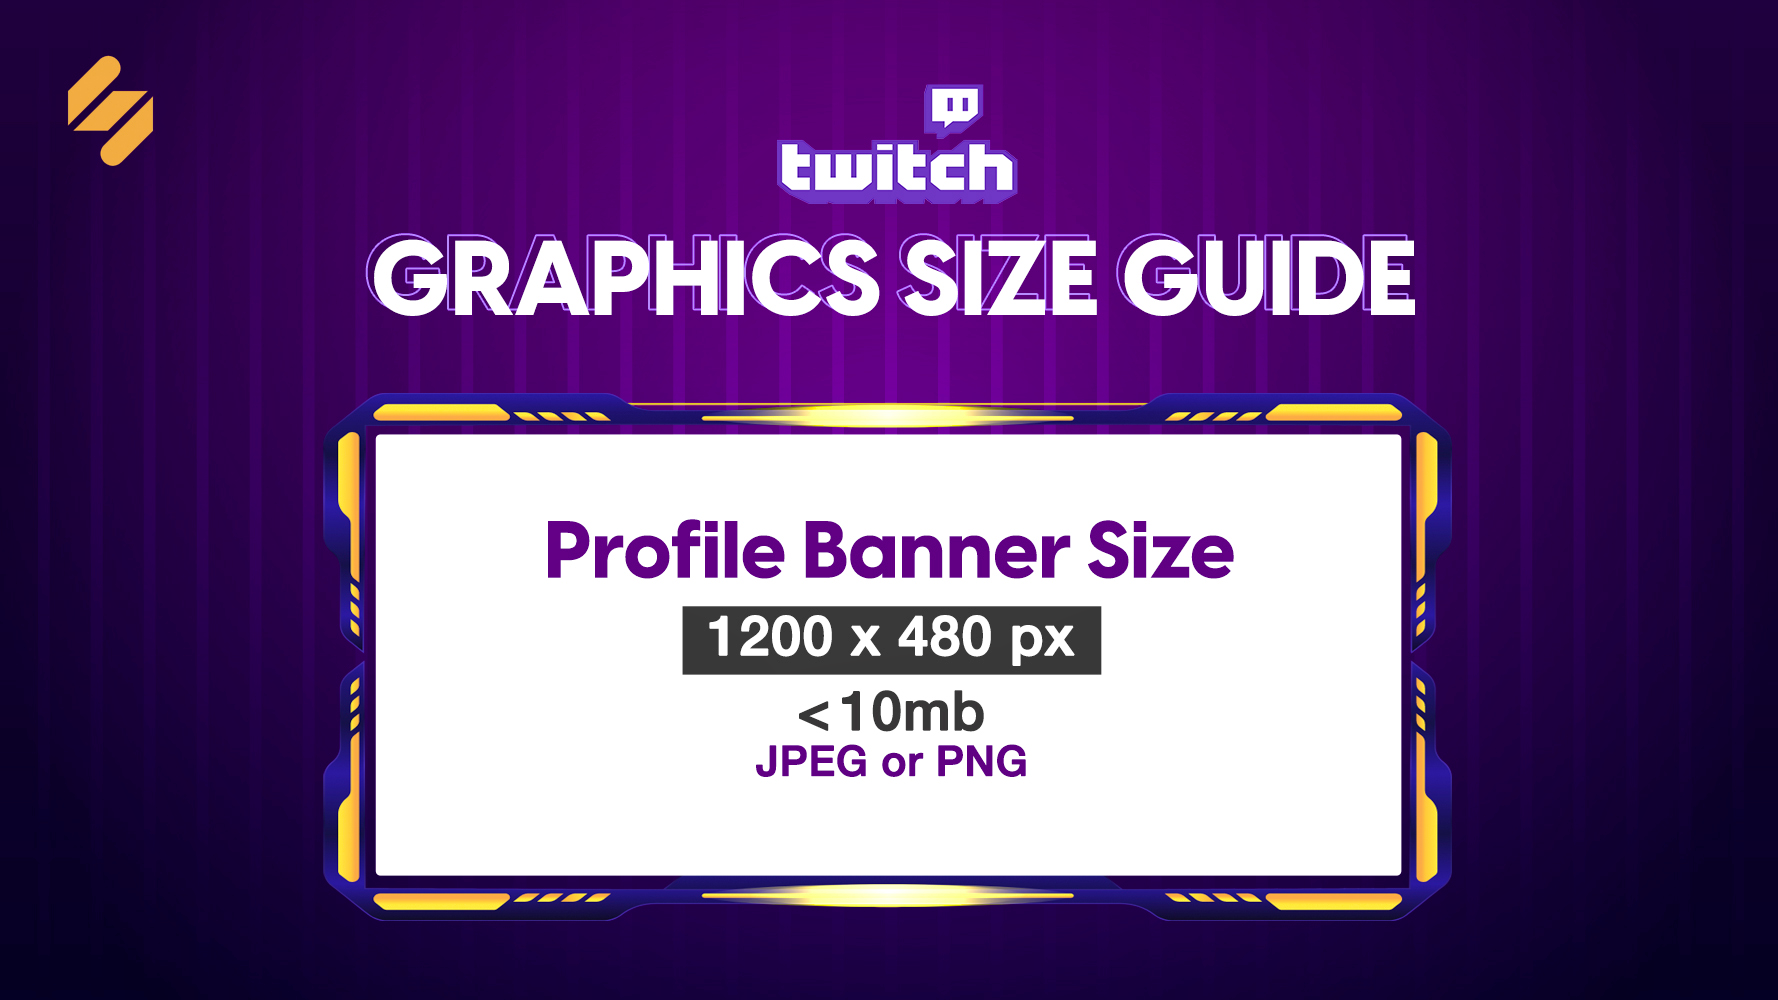 The All-in-One Twitch Size Guide for 2022 Simplified